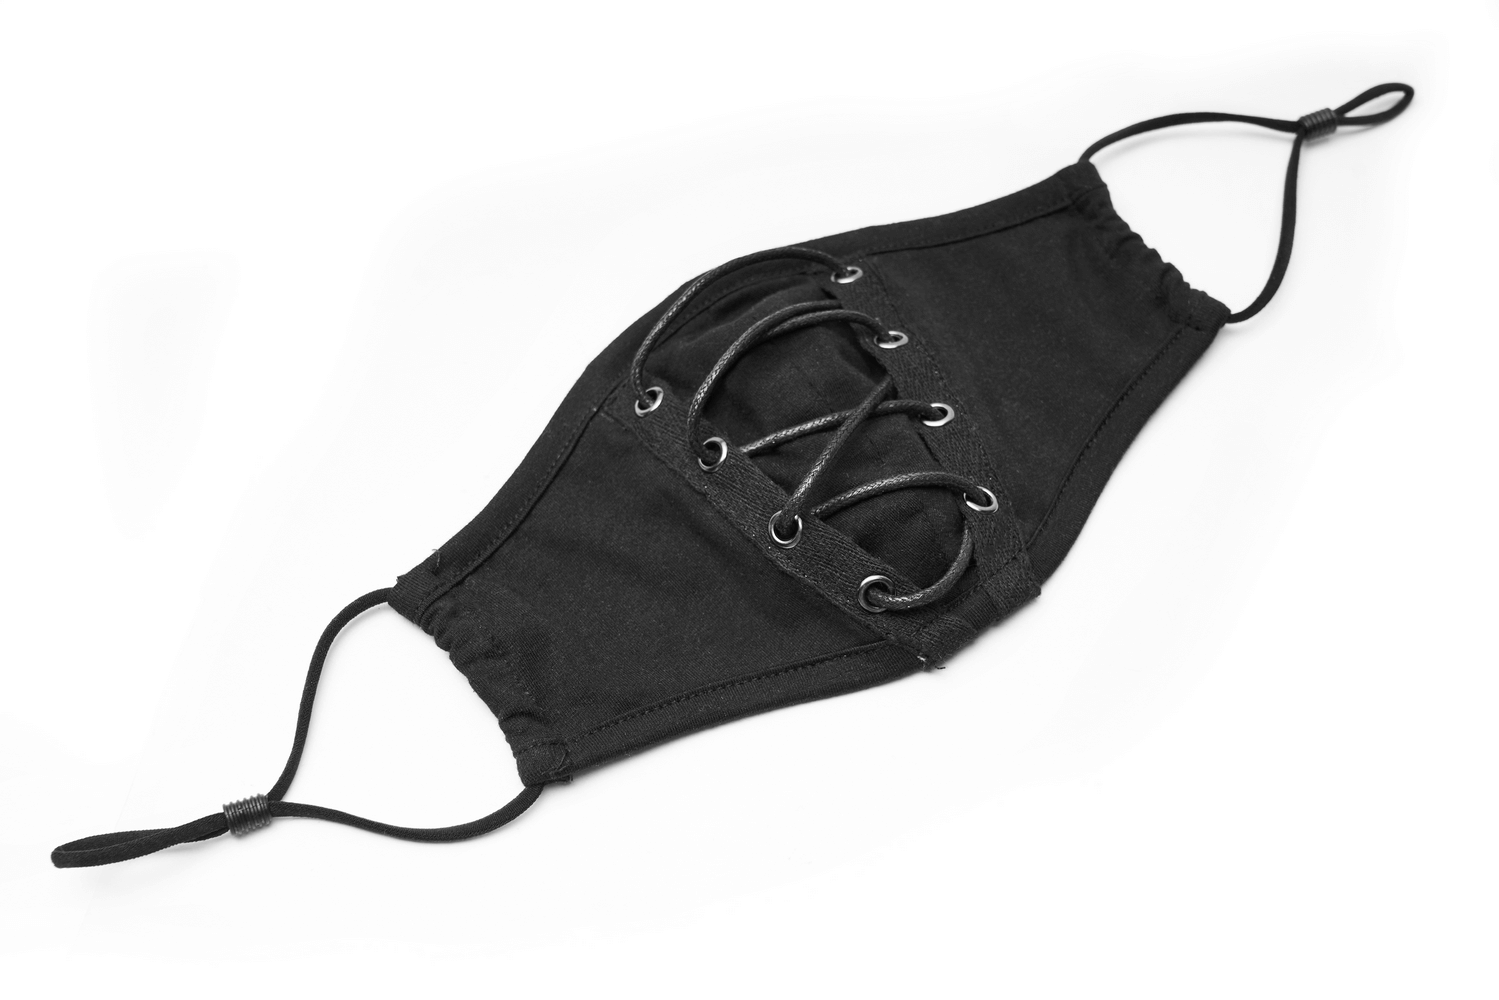 Cotton Punk Mask with Adjustable Strapping and Mesh Lining